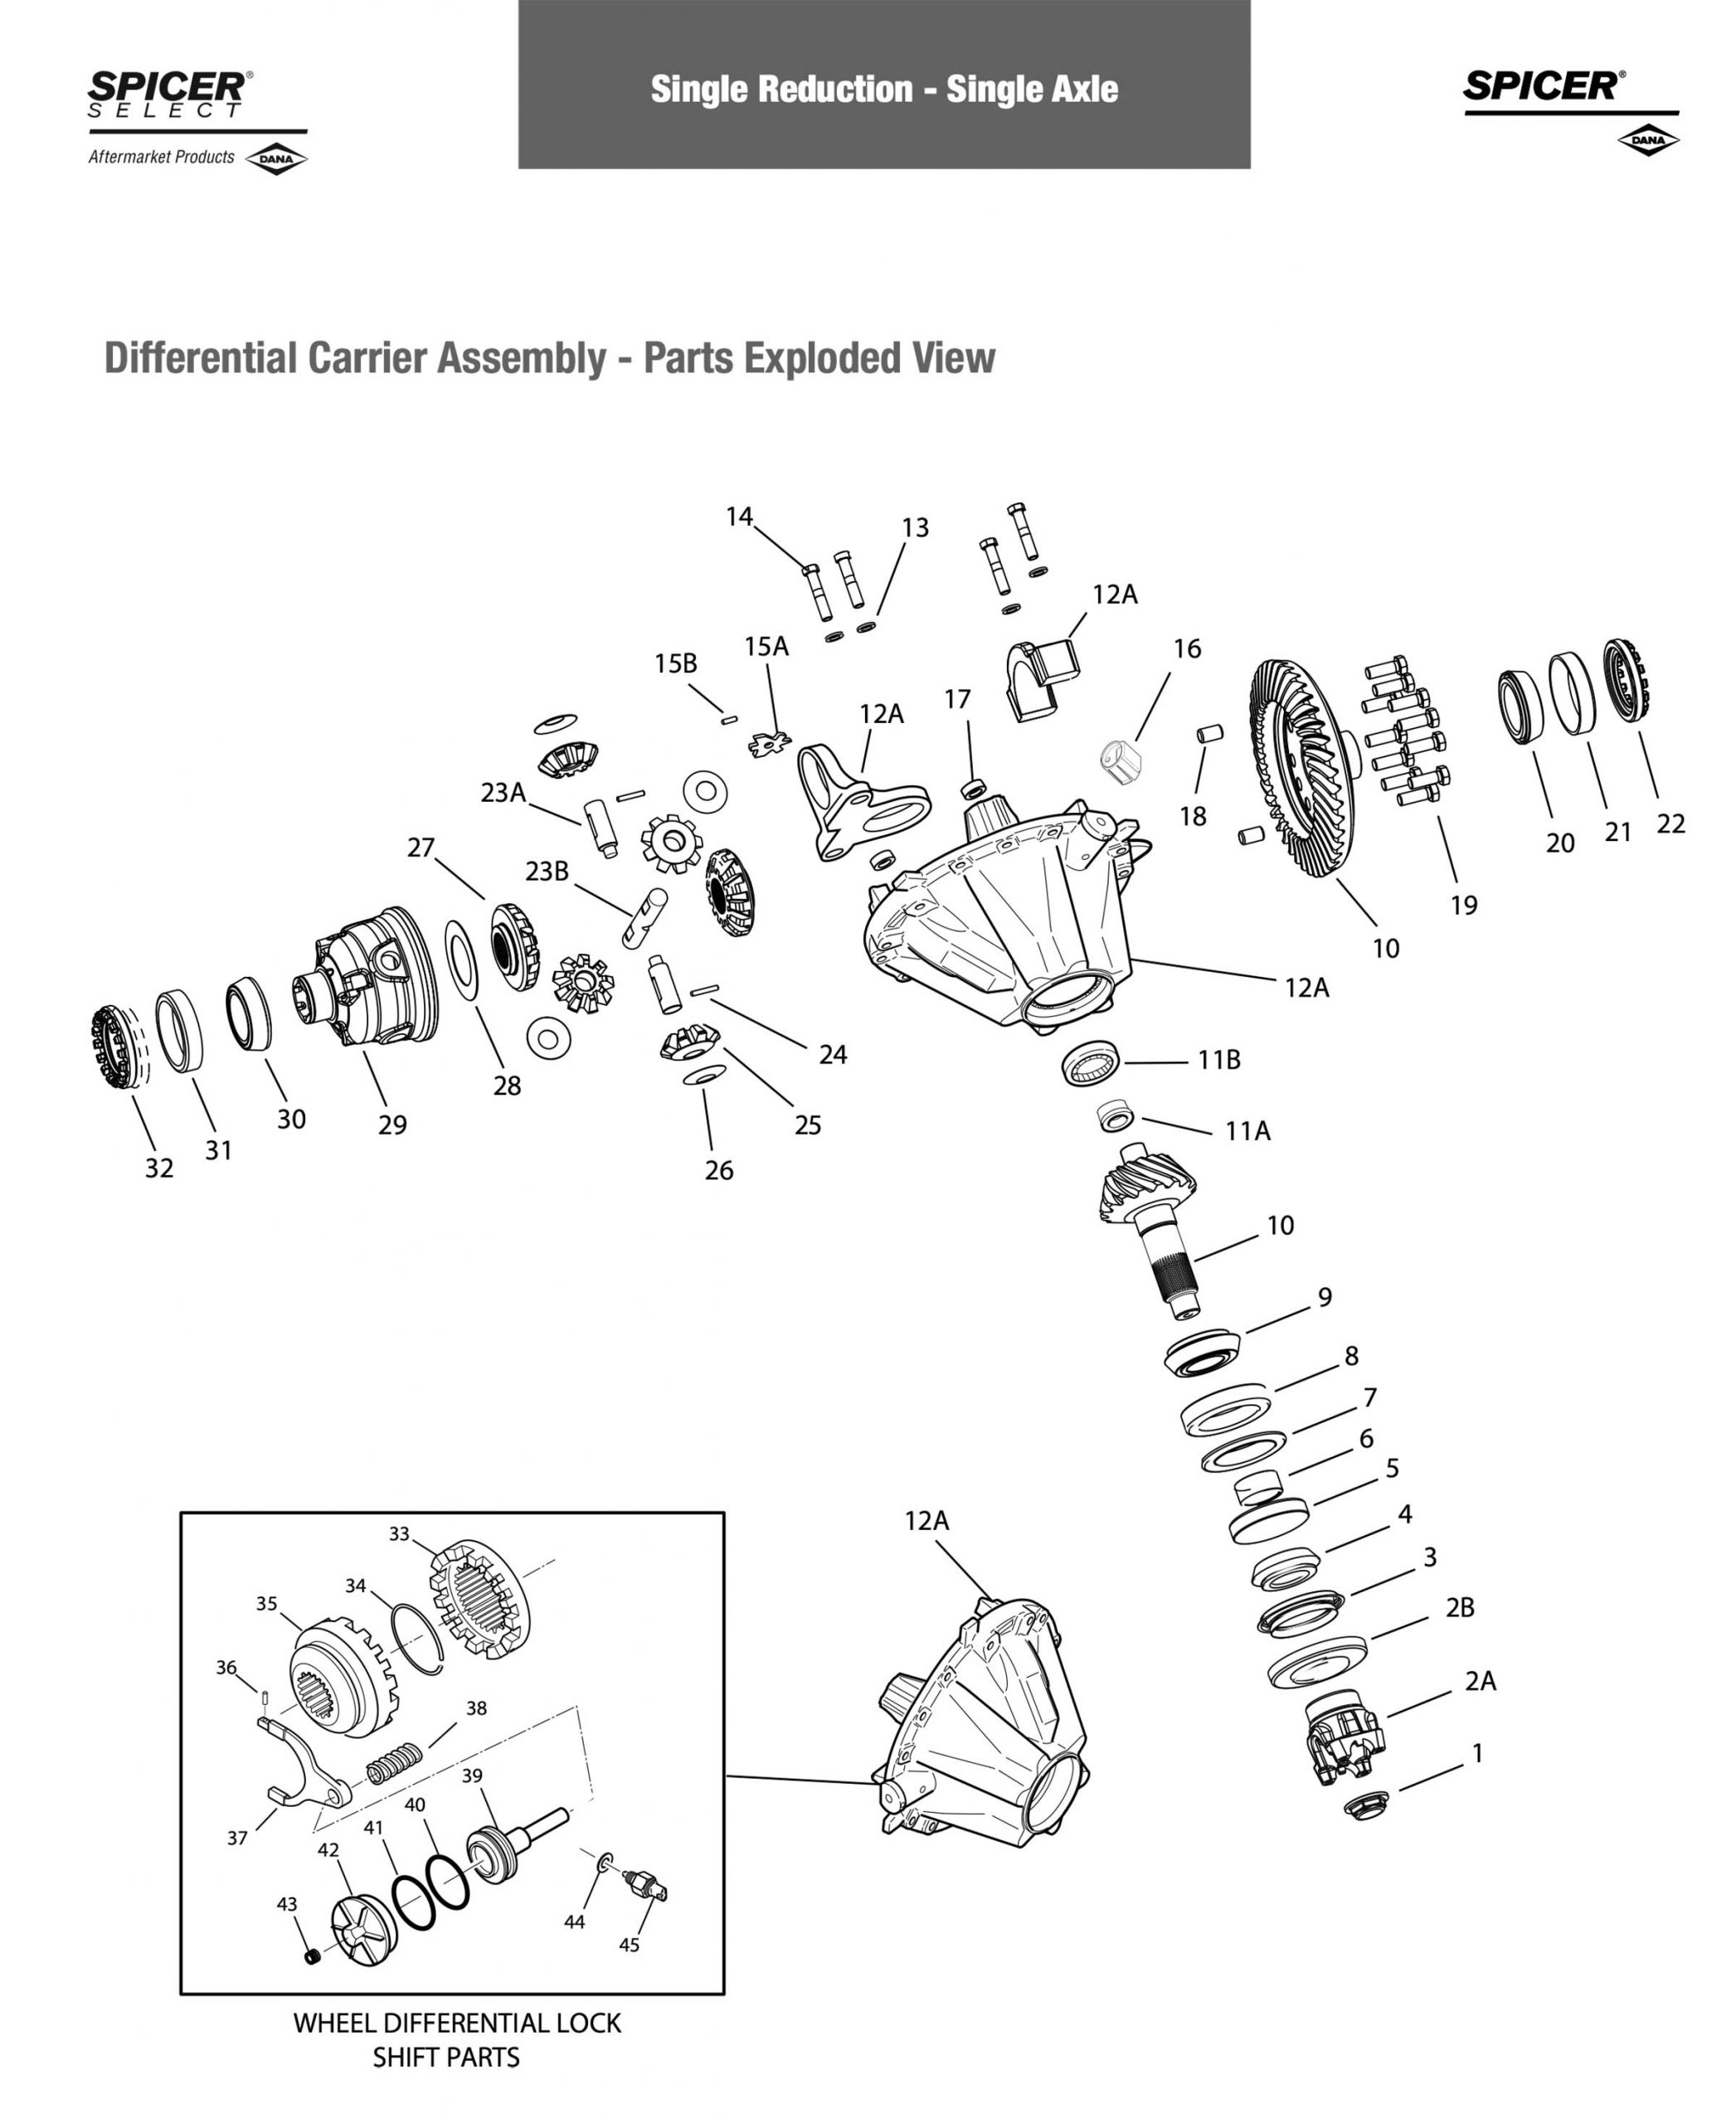 Spicer S110 S135 S150 - Exploded View Parts Diagram